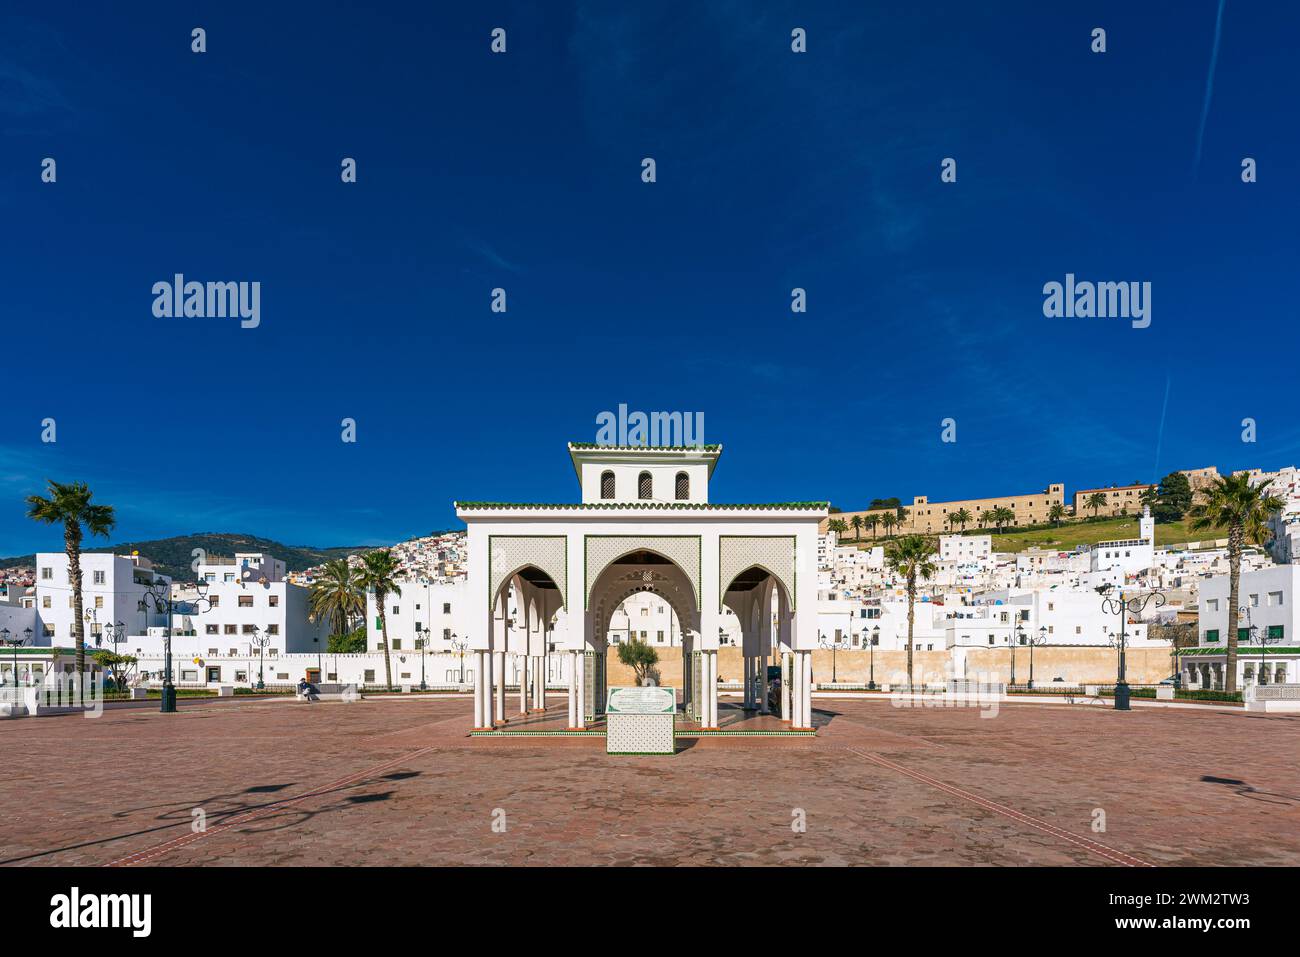 Place Feddan, Town square with striking architecture in Tetouan, Morocco, North Africa Stock Photo